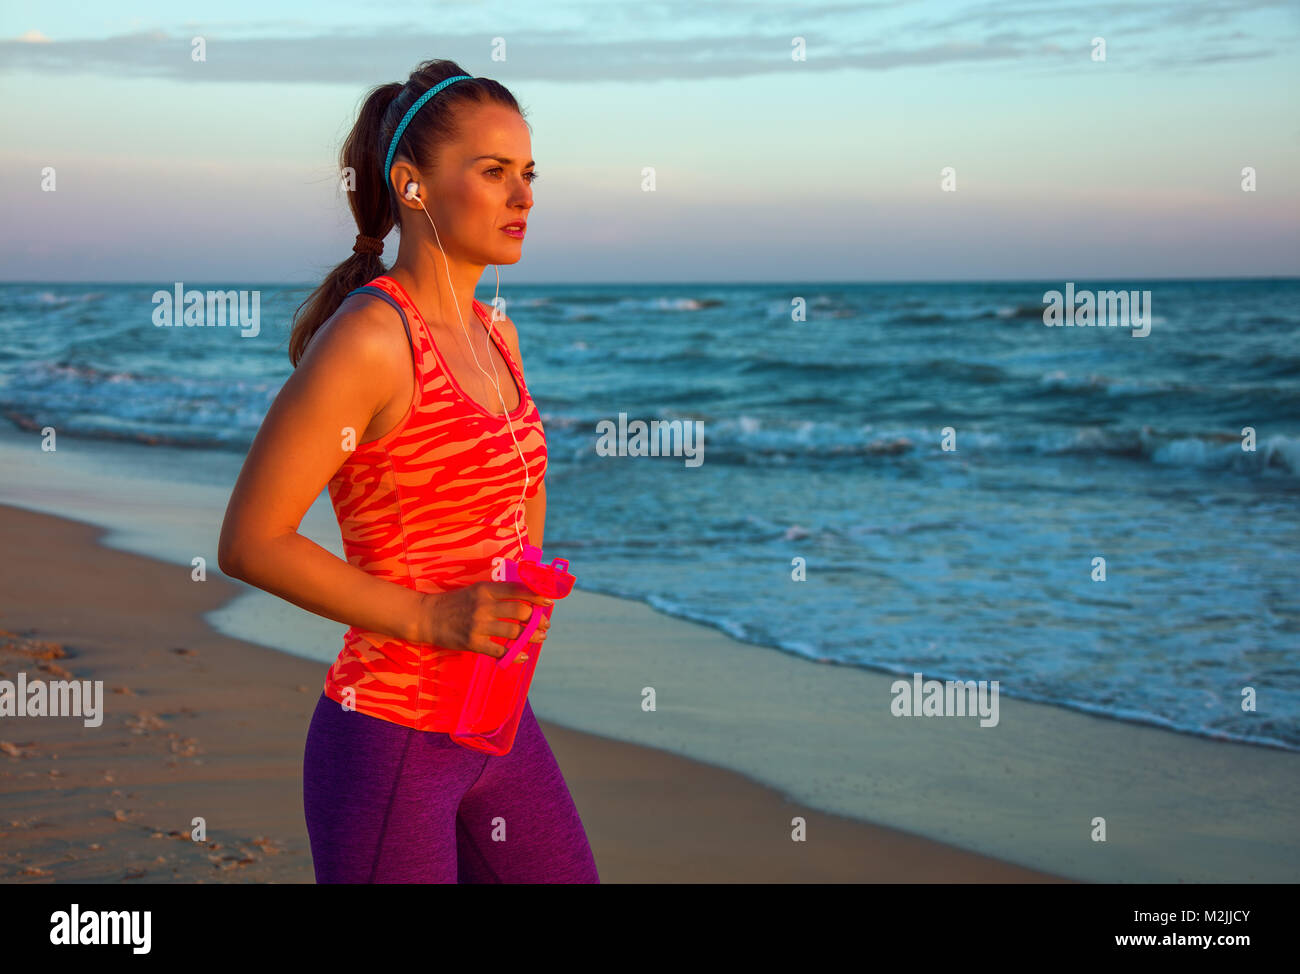 Refreshing wild sea side workout. Portrait of fit woman in sport clothes on the seashore at sunset with bottle of water looking into the distance Stock Photo